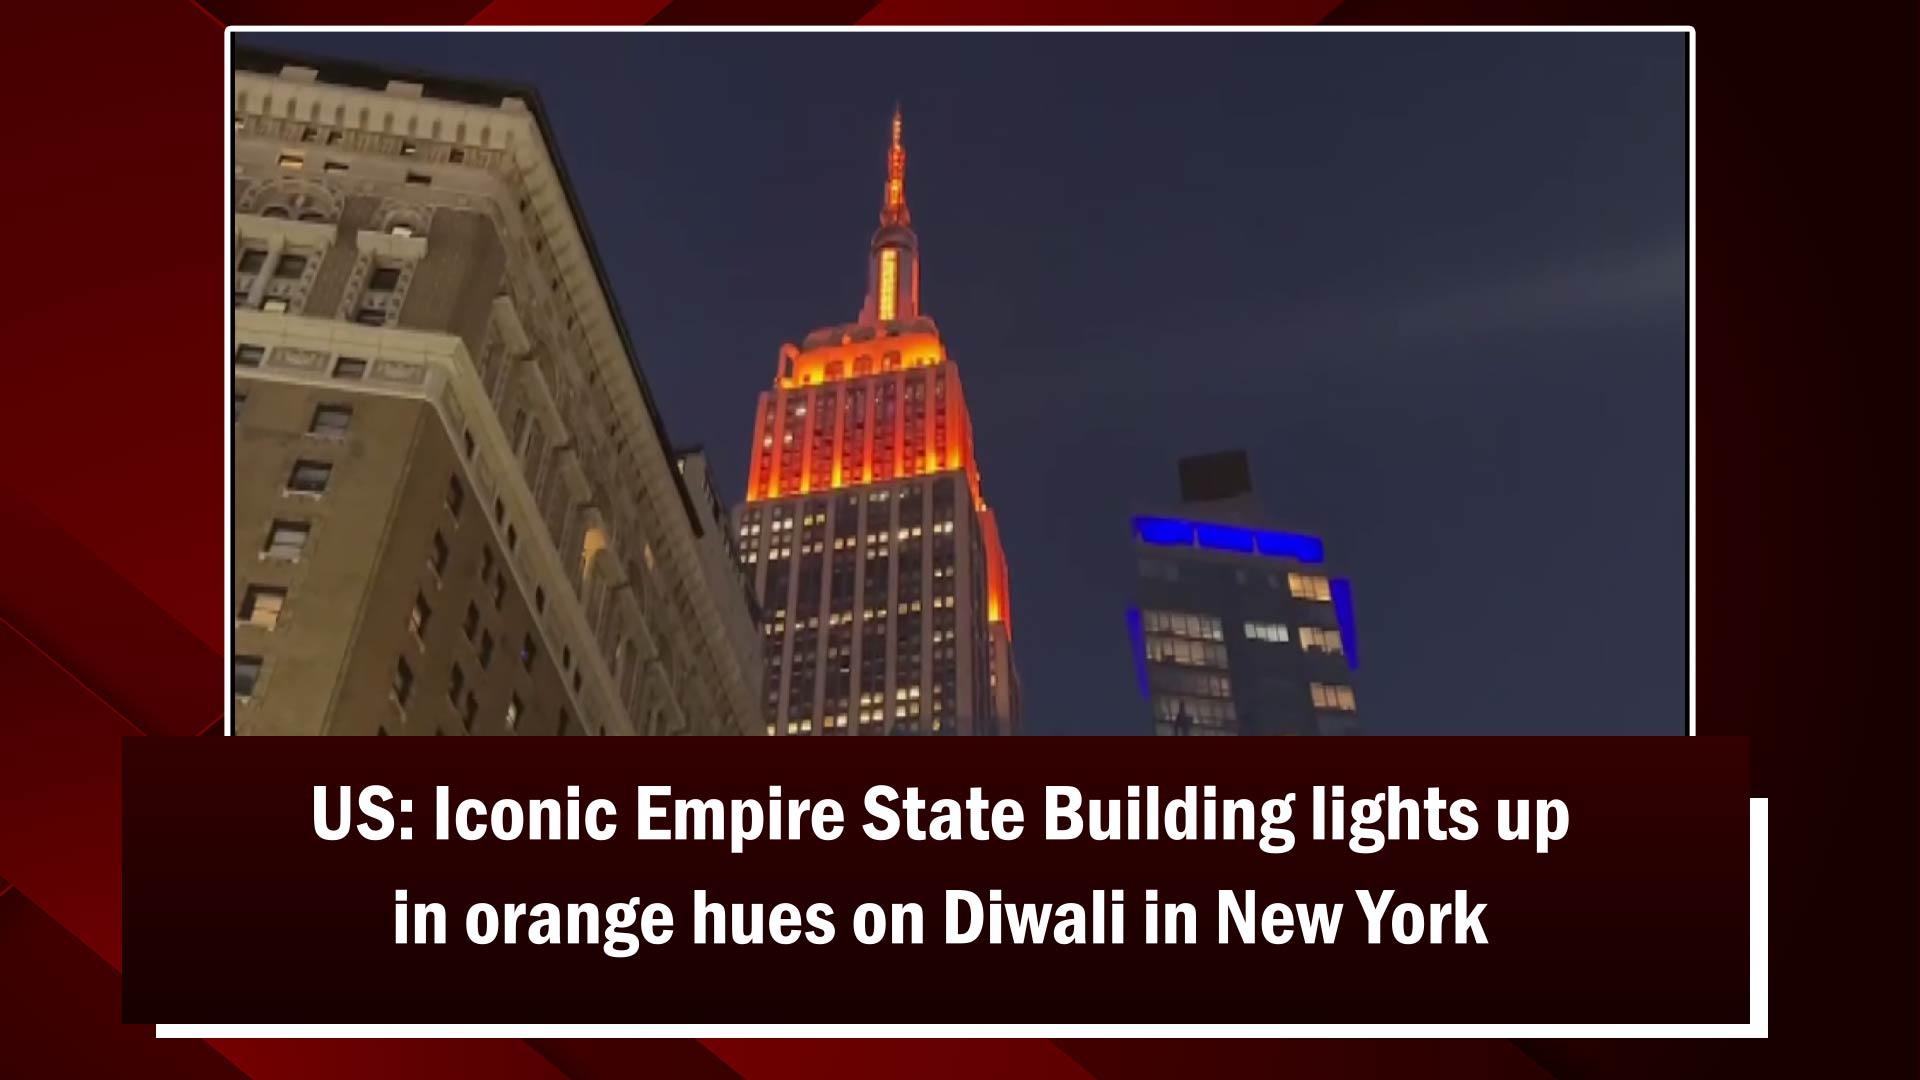 US: Iconic Empire State Building lights up in orange hues on Diwali in New York